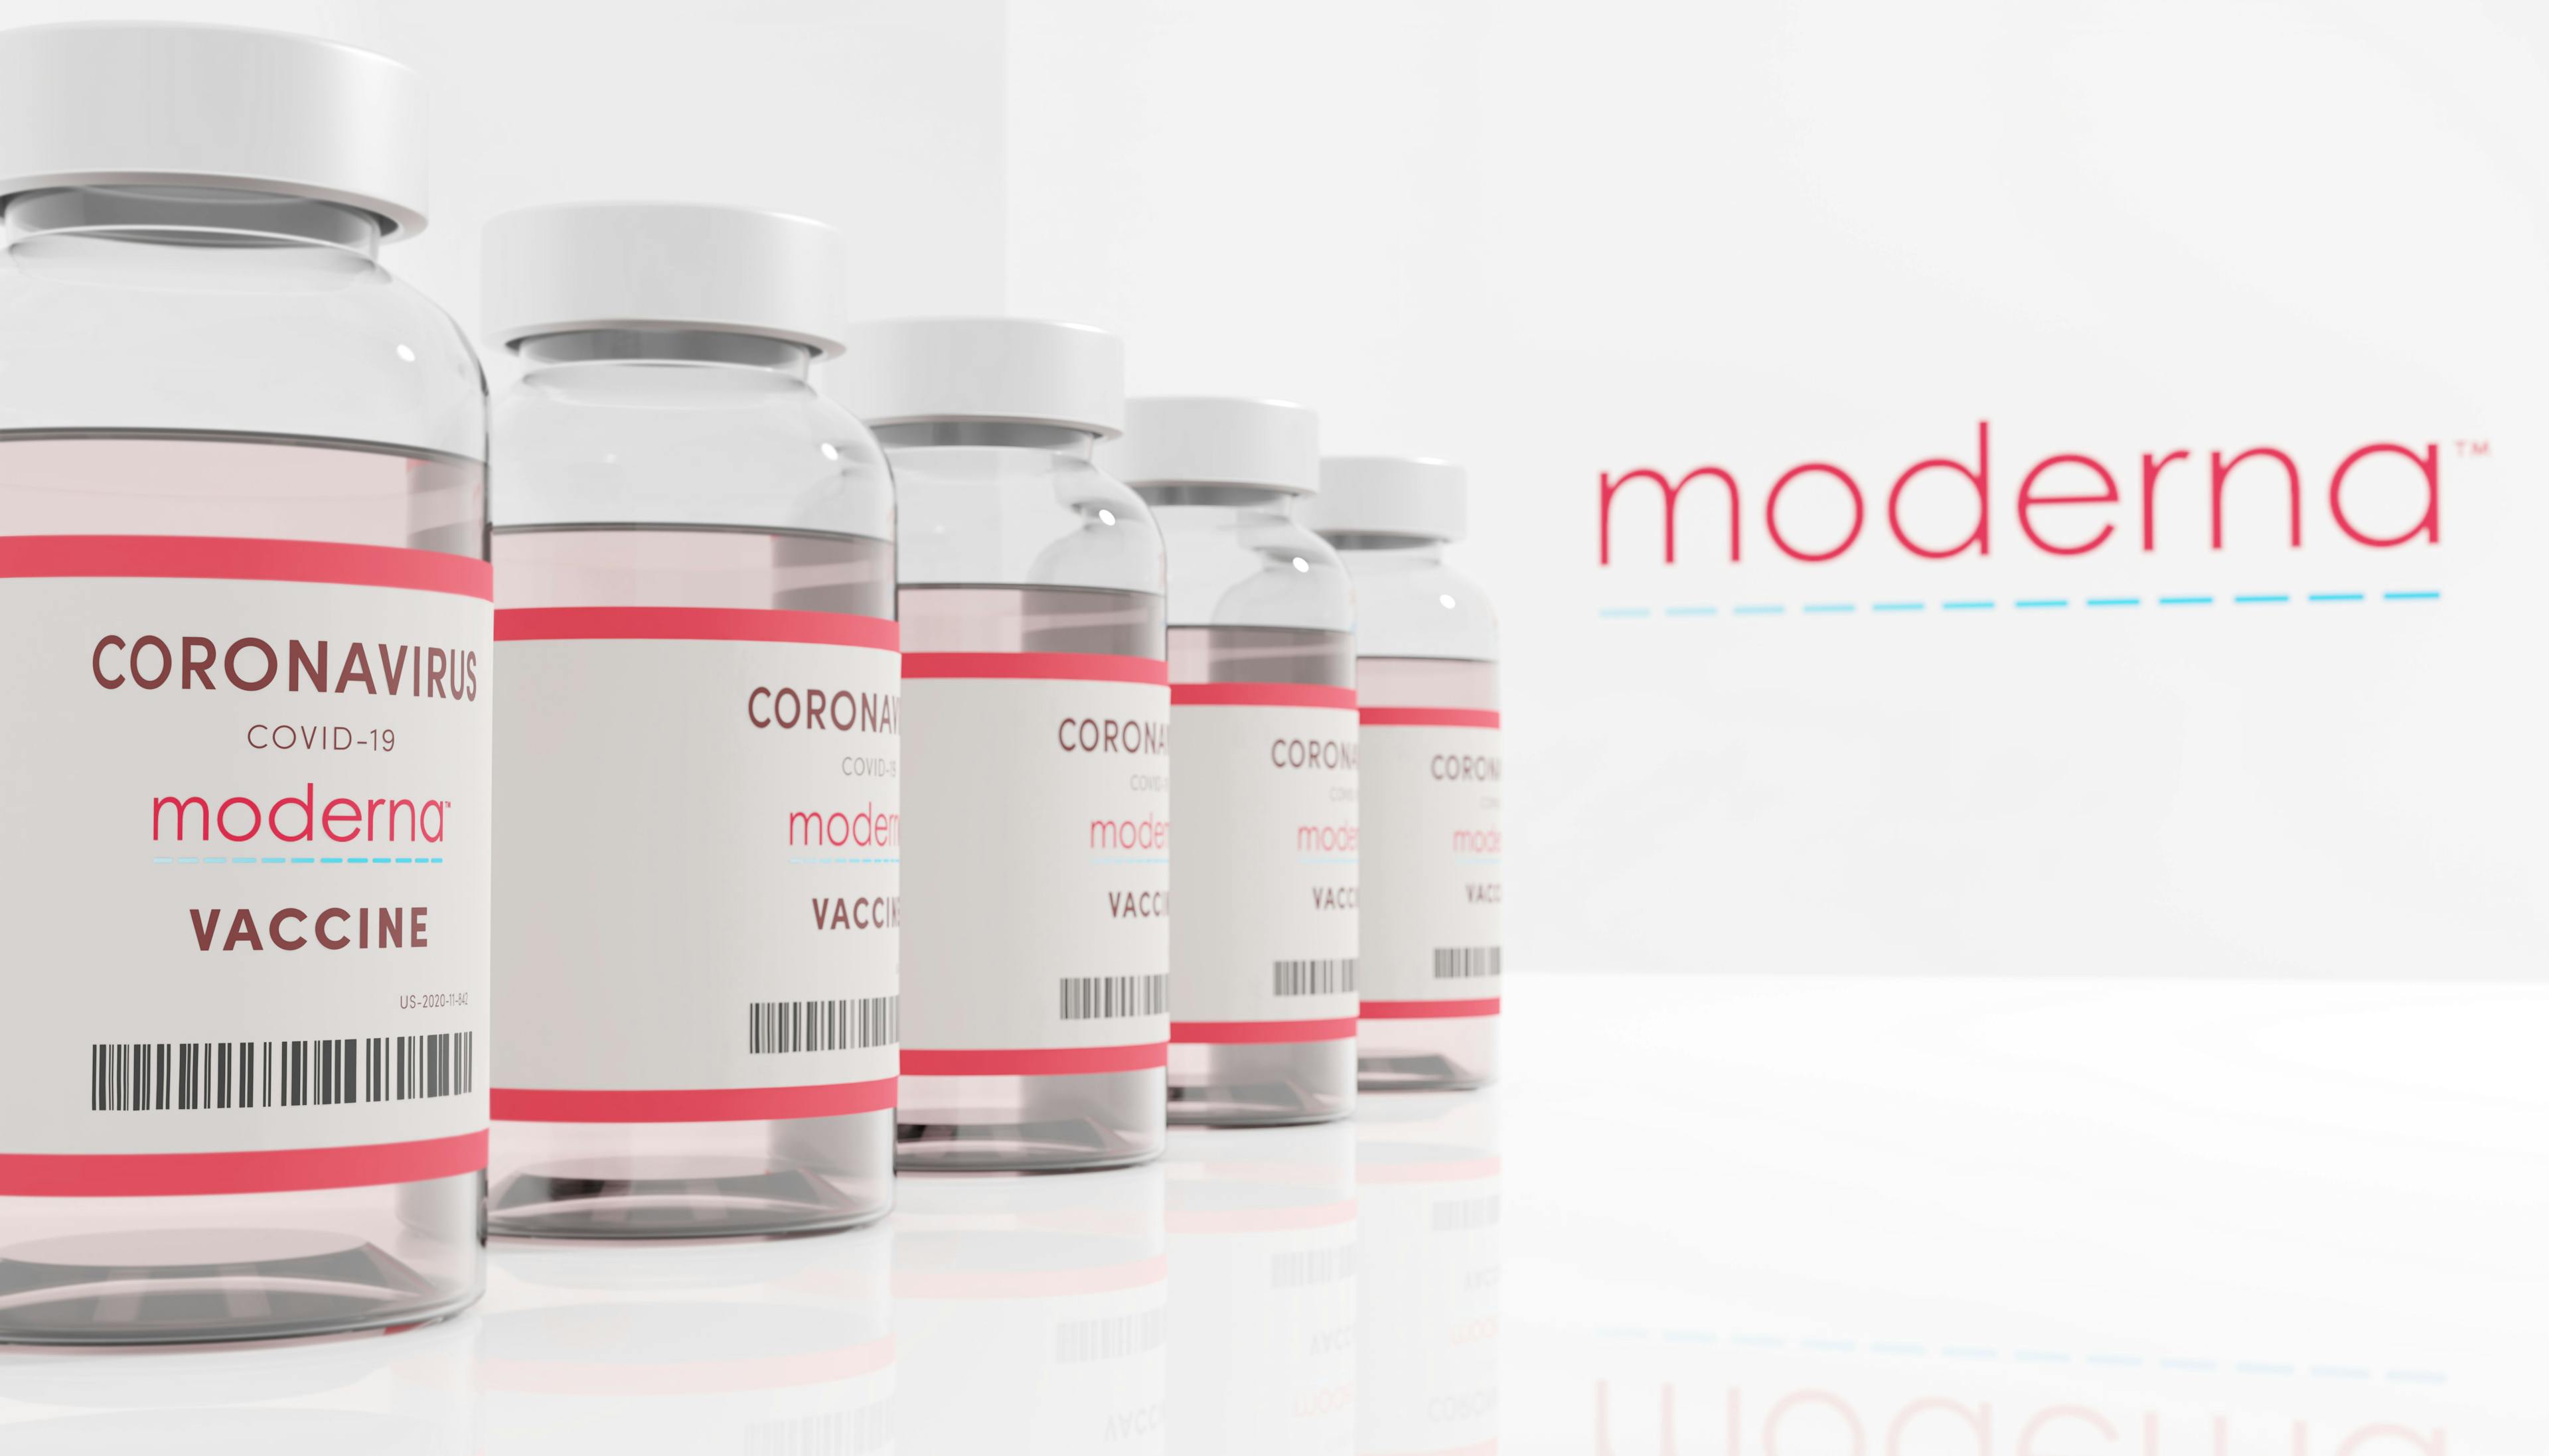 Moderna’s COVID-19 vaccine candidate shows 94.5 percent efficacy in Phase 3 trial